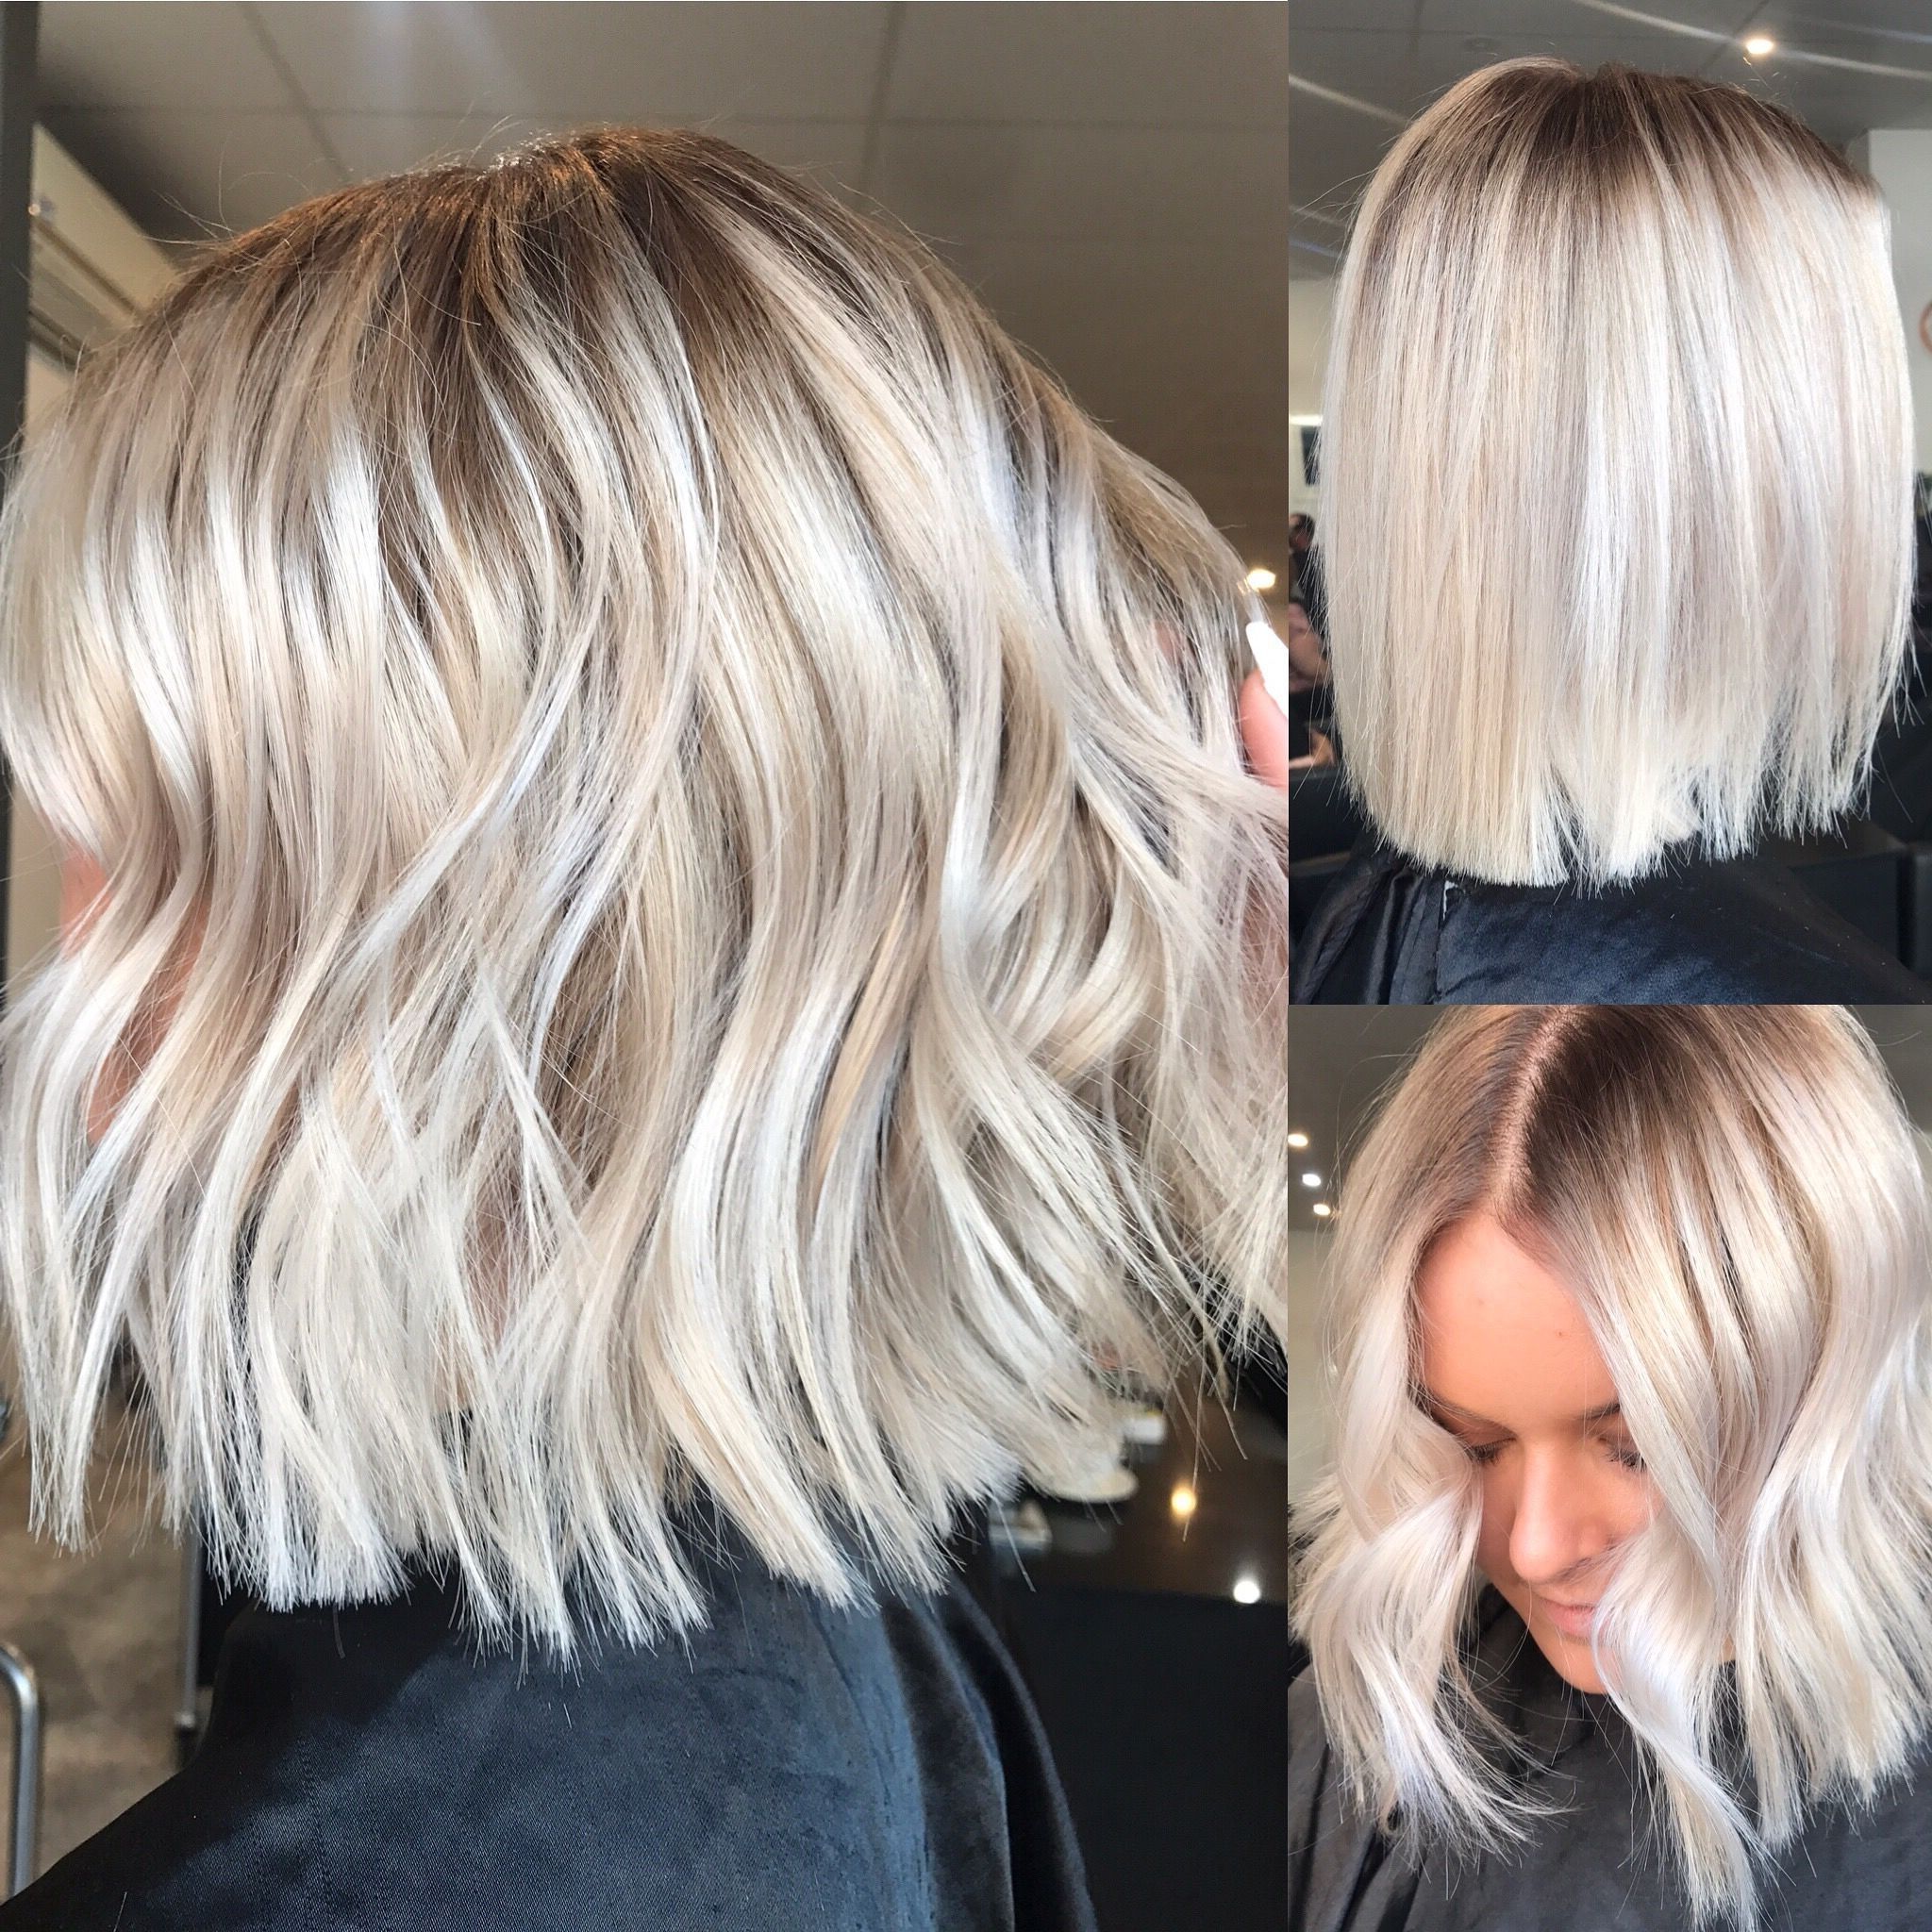 Most Recent Multi Tonal Golden Bob Blonde Hairstyles With Blonde Balayage, Long Hair, Cool Girl Hair (View 6 of 20)